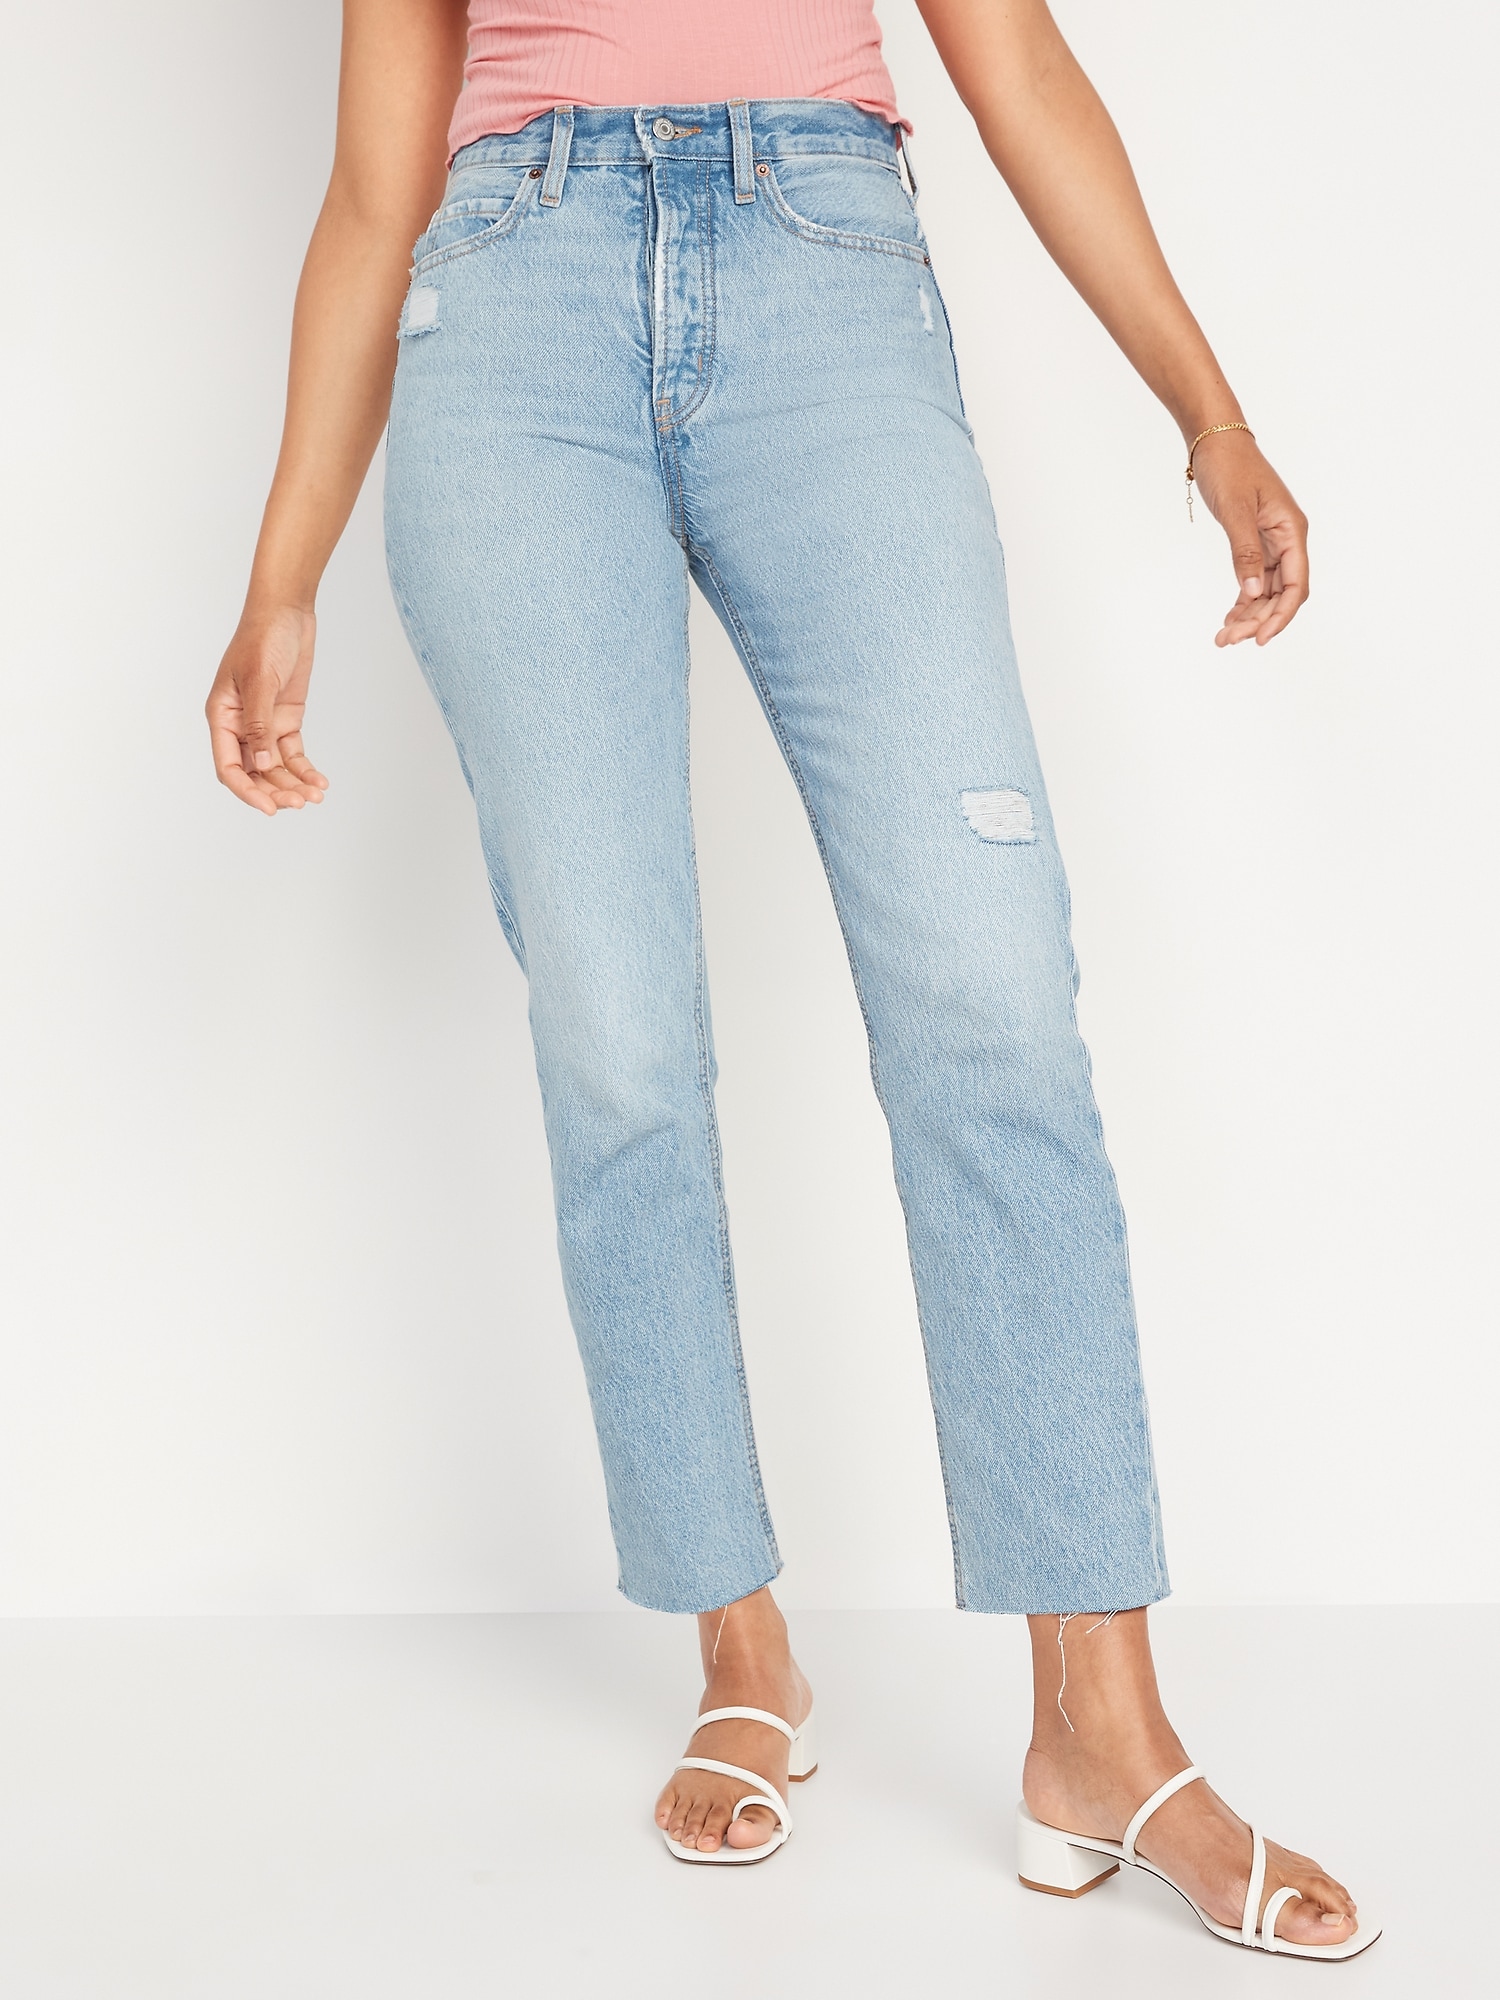 Oldnavy Extra High-Waisted Button-Fly Sky-Hi Straight Non-Stretch Cut-Off Jeans for Women